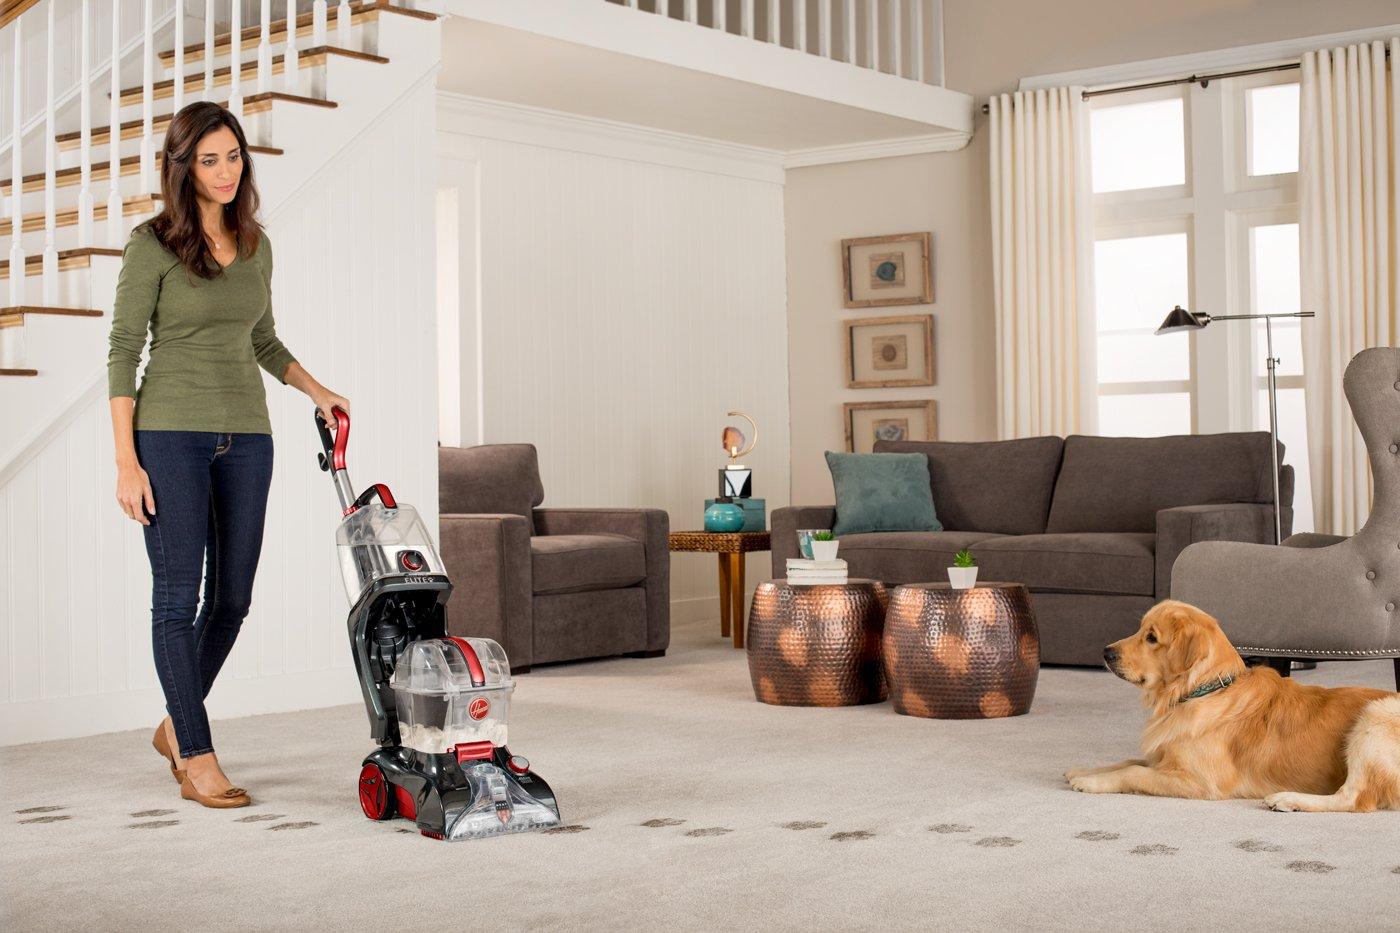 Hoover Power Scrub Elite Pet Upright Carpet Cleaner and Shampooer,  Lightweight Machine, Red, FH50251PC